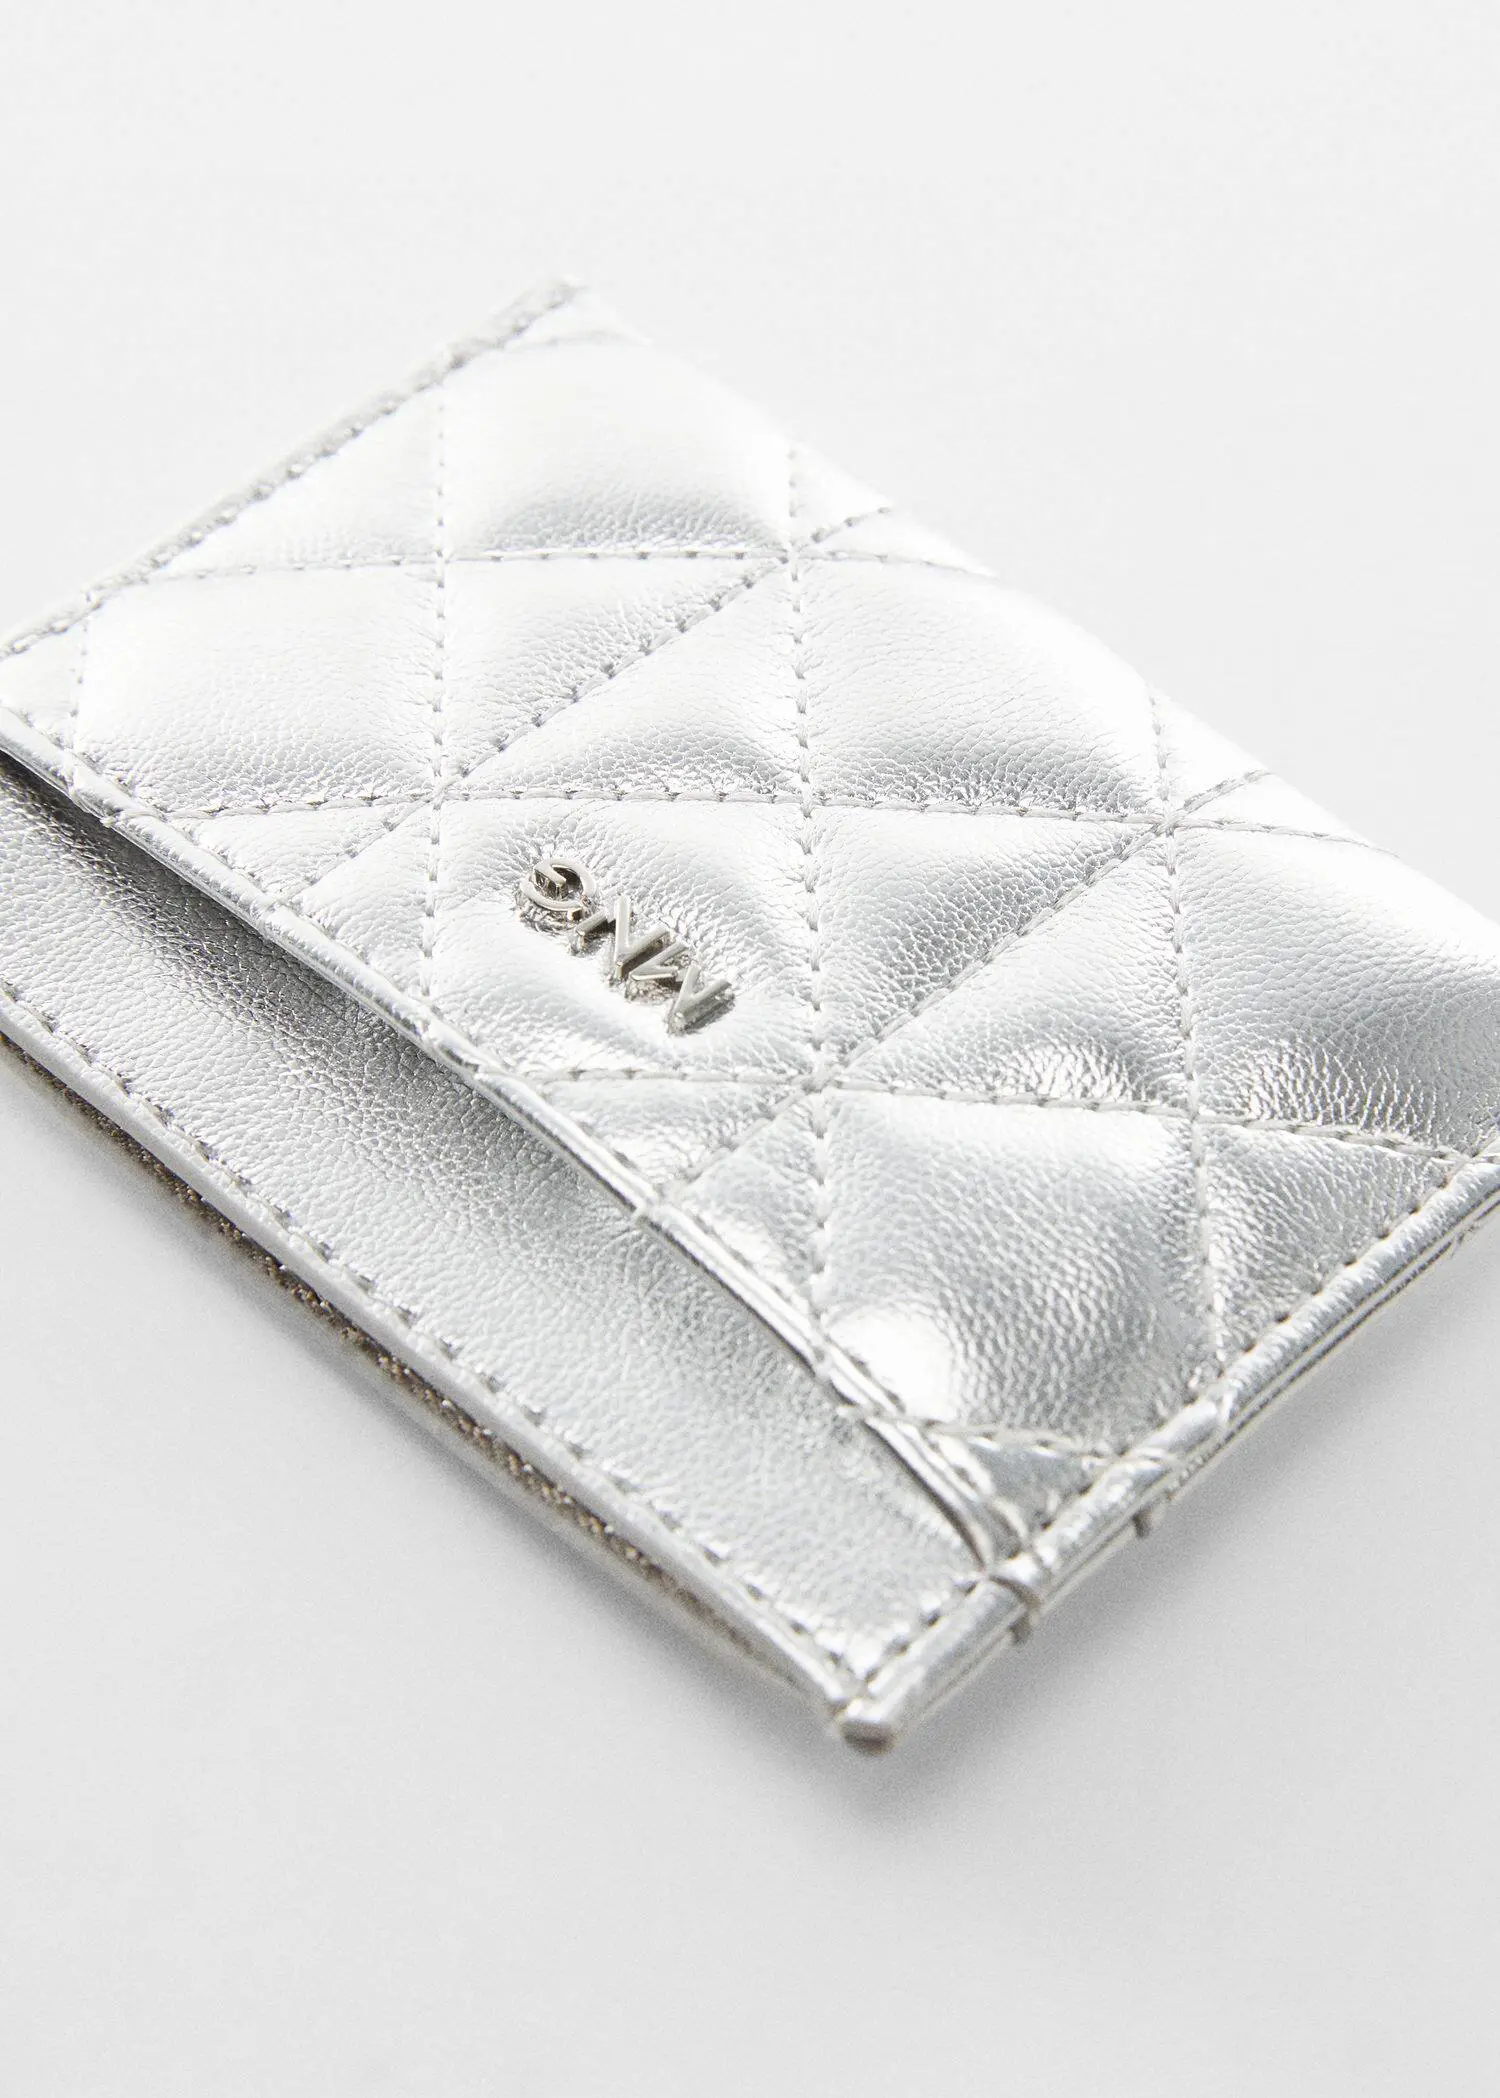 Mango Quilted cardholder with logo. 3